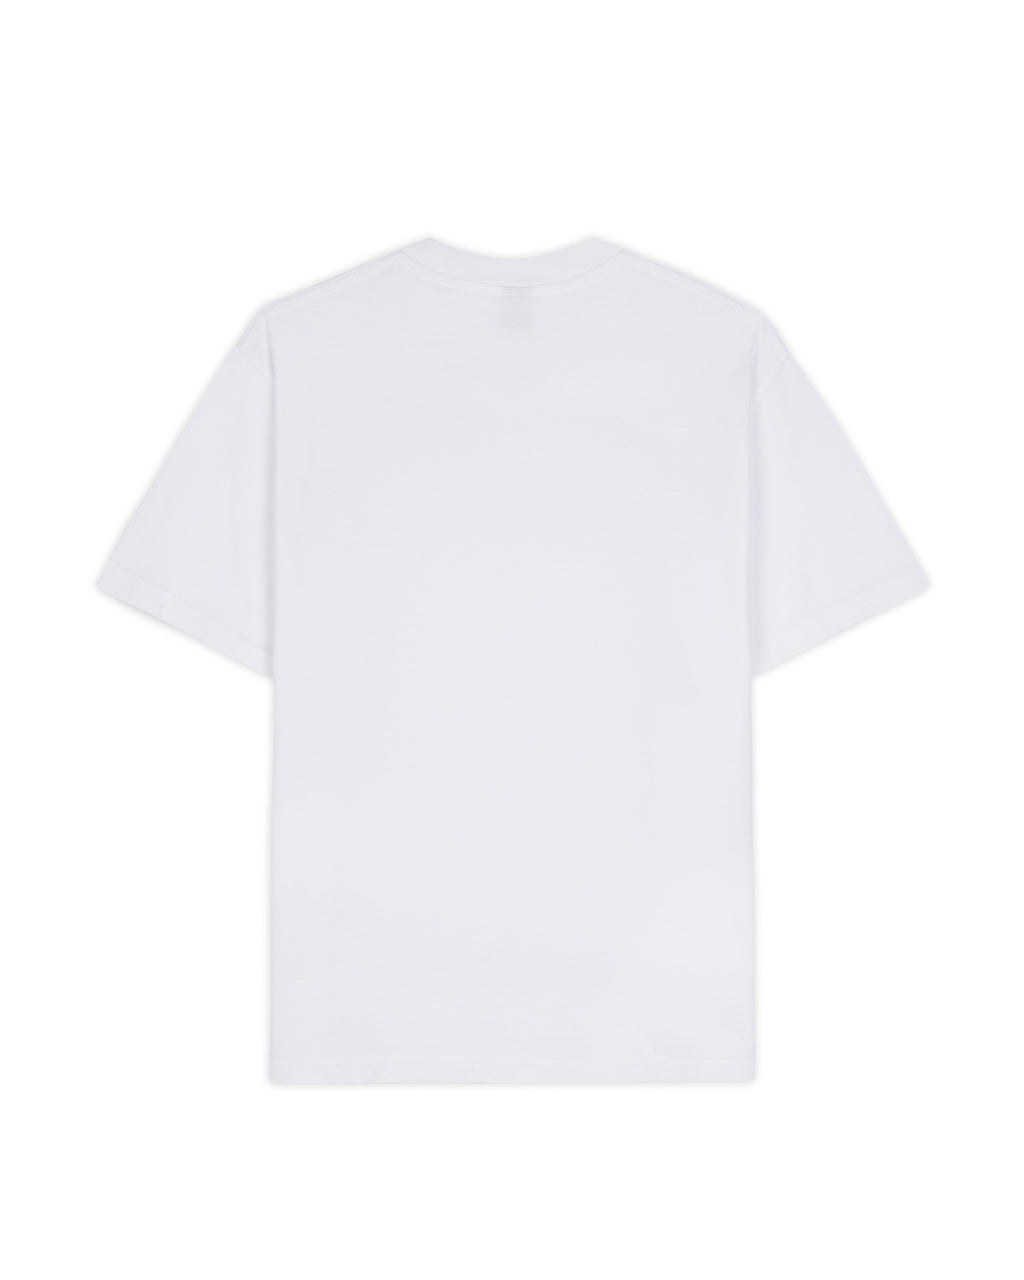 Space/Time T-Shirt - White 2